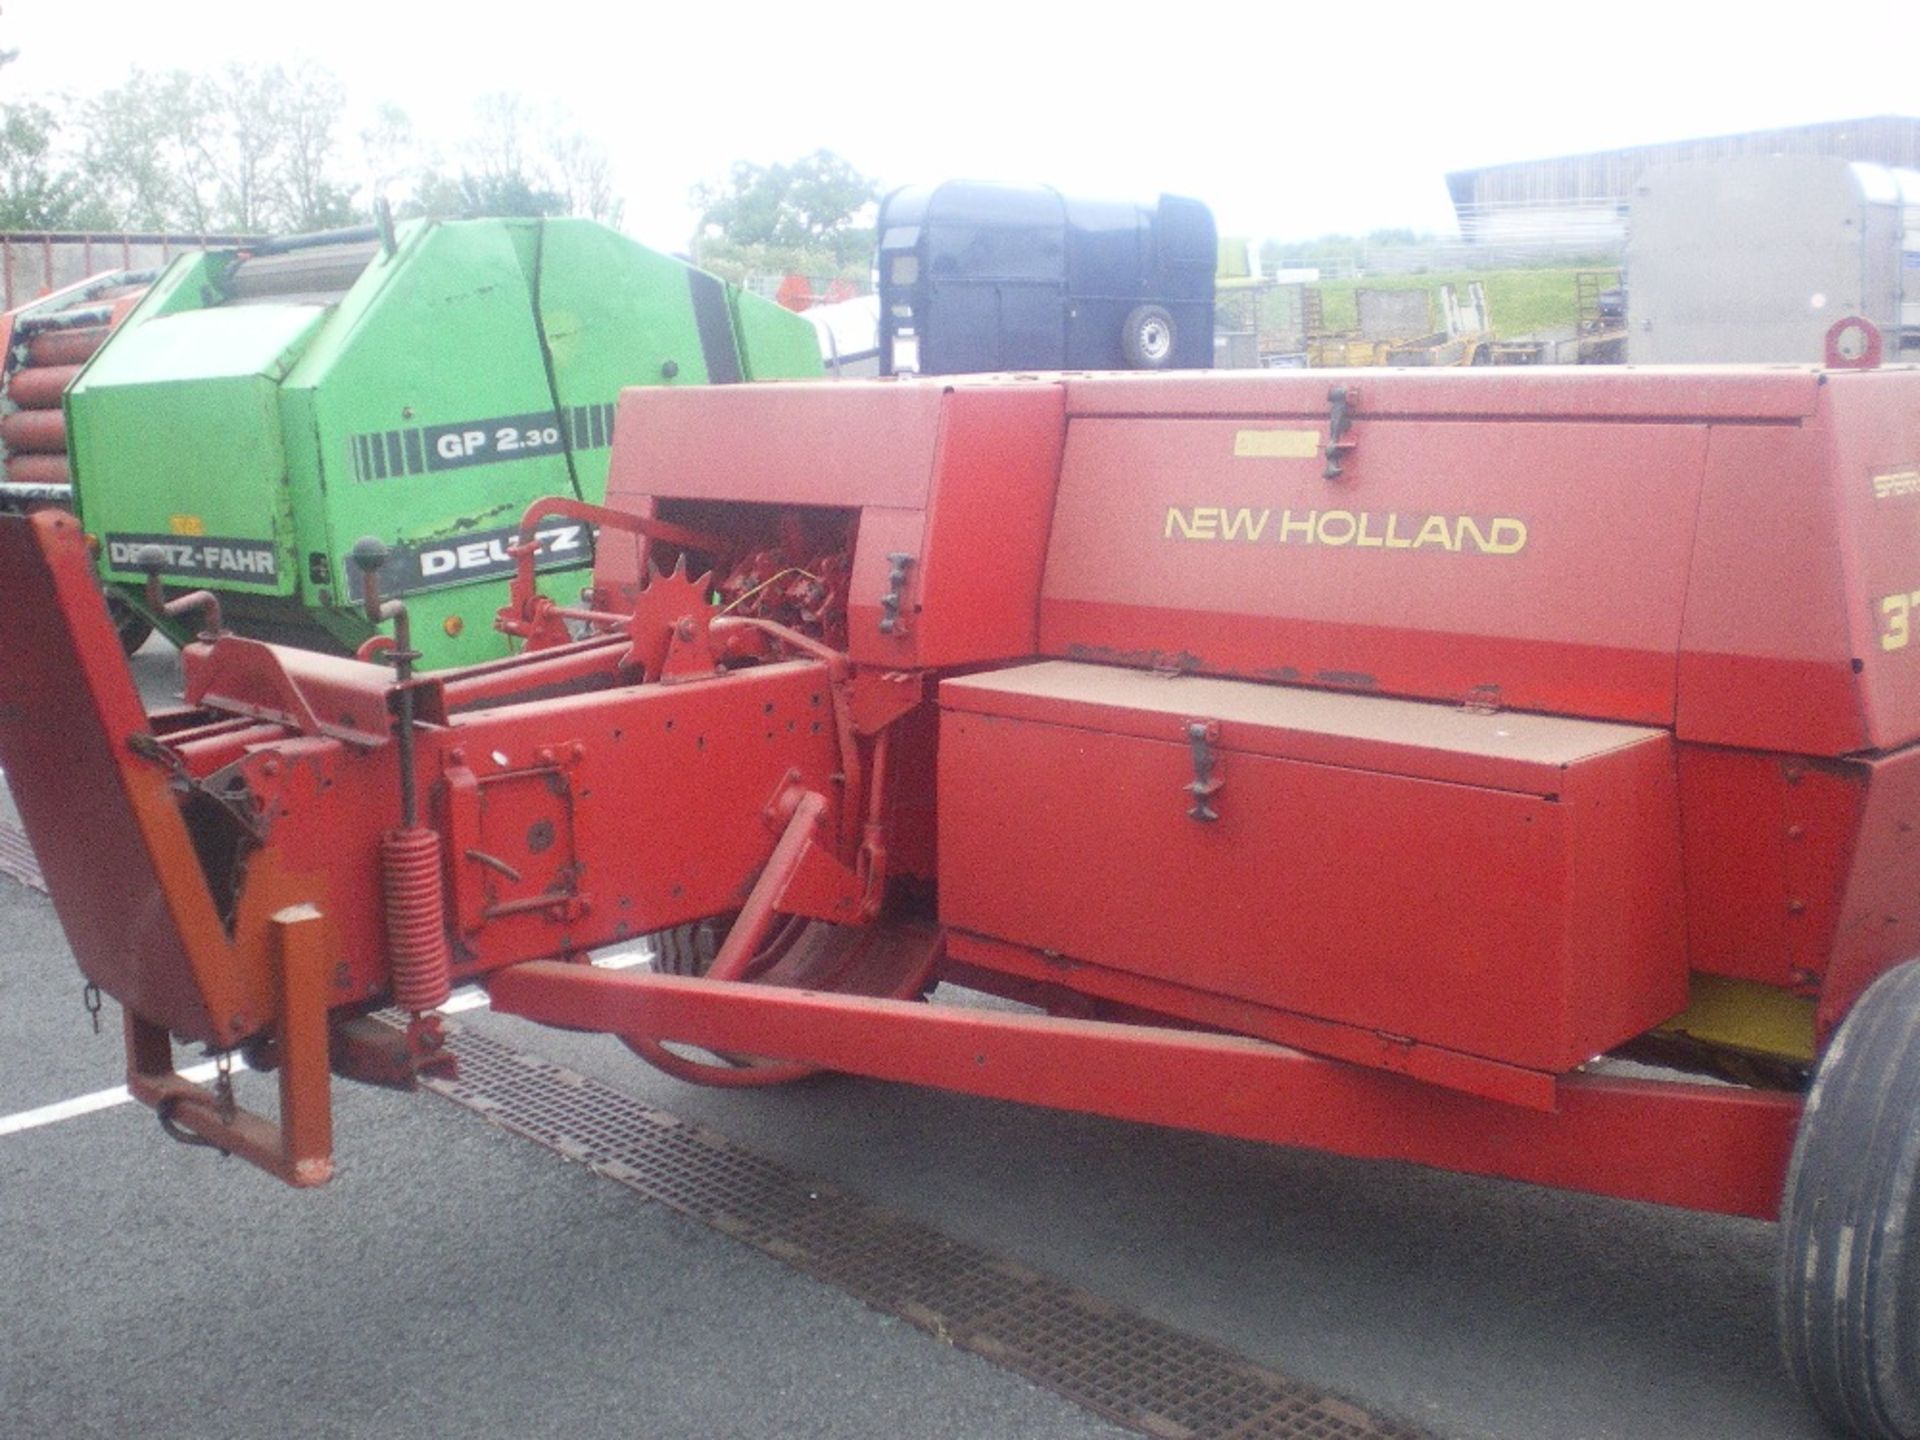 NEW HOLLAND 370 HAYLINER CONVENTIONAL BALER - Image 2 of 2